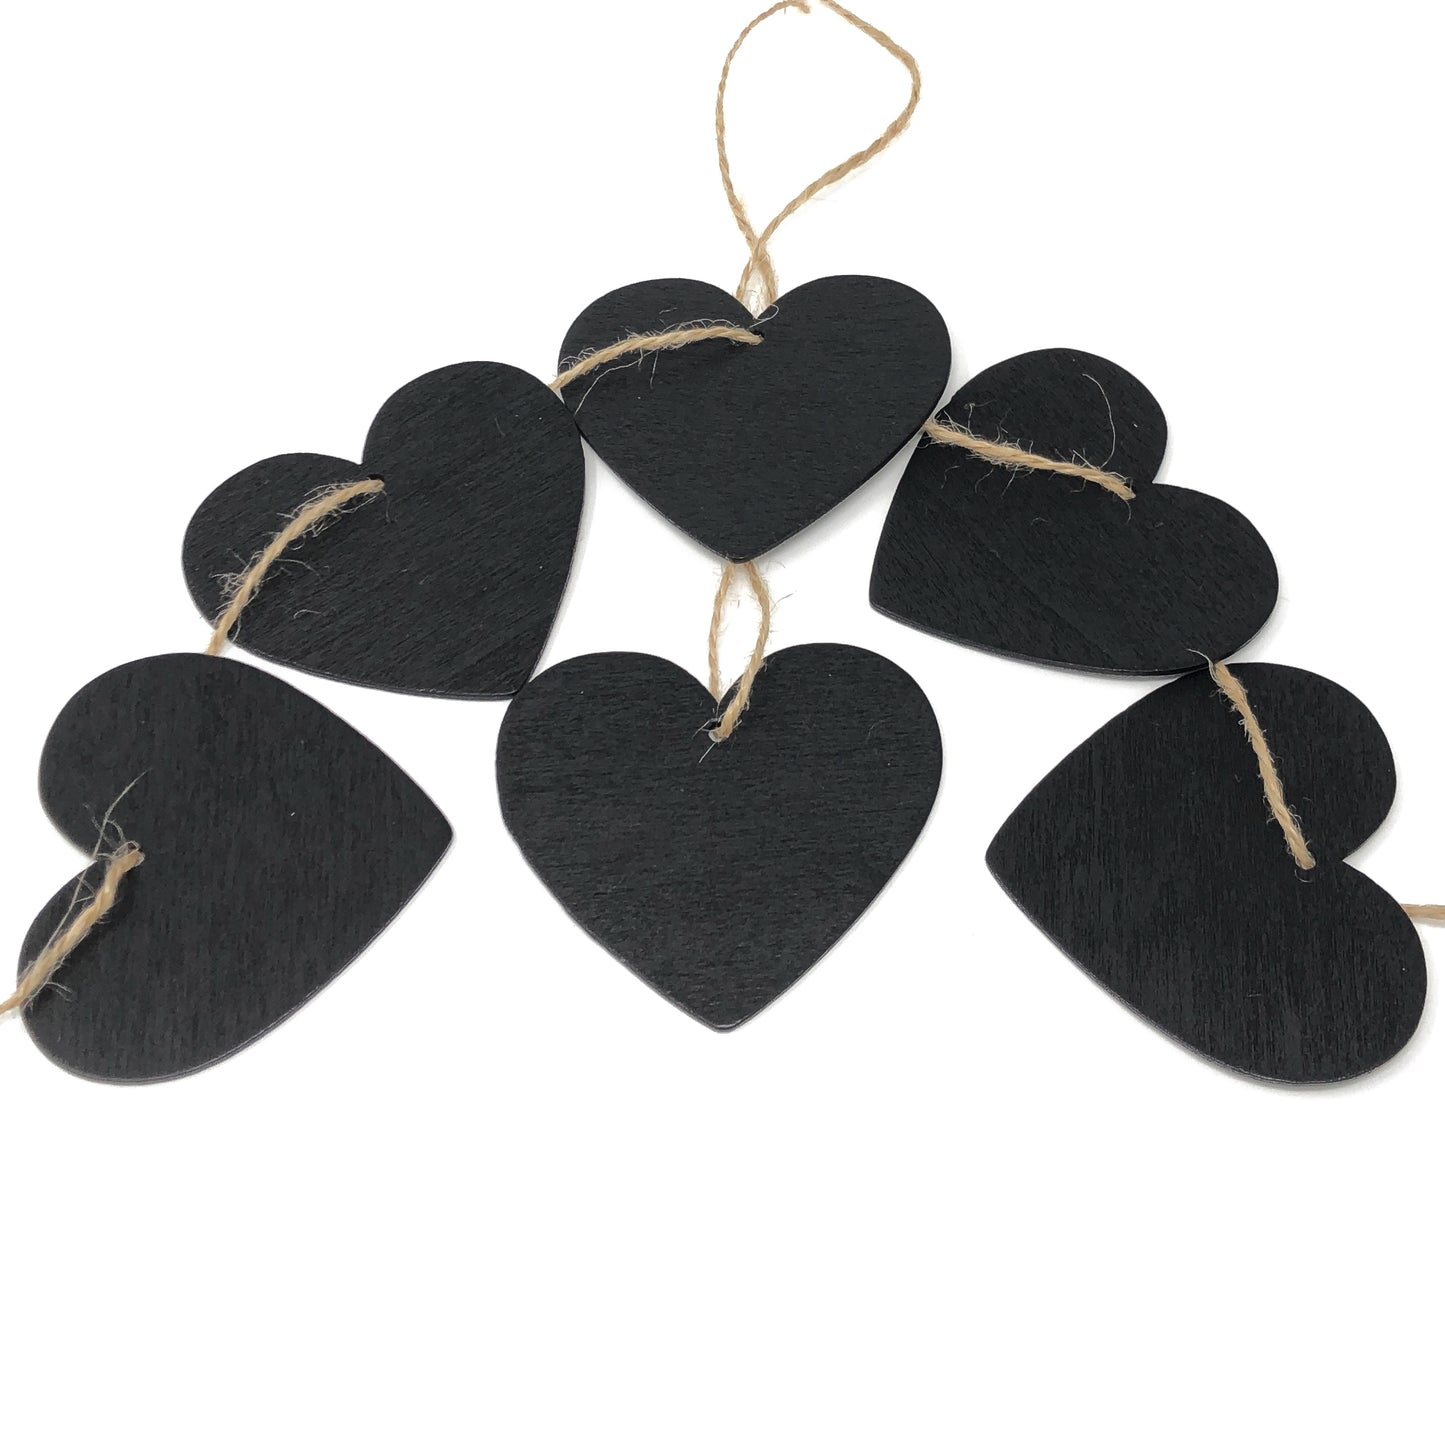 Mini Wooden Chalkboard Hearts for Wedding Table Name Tags